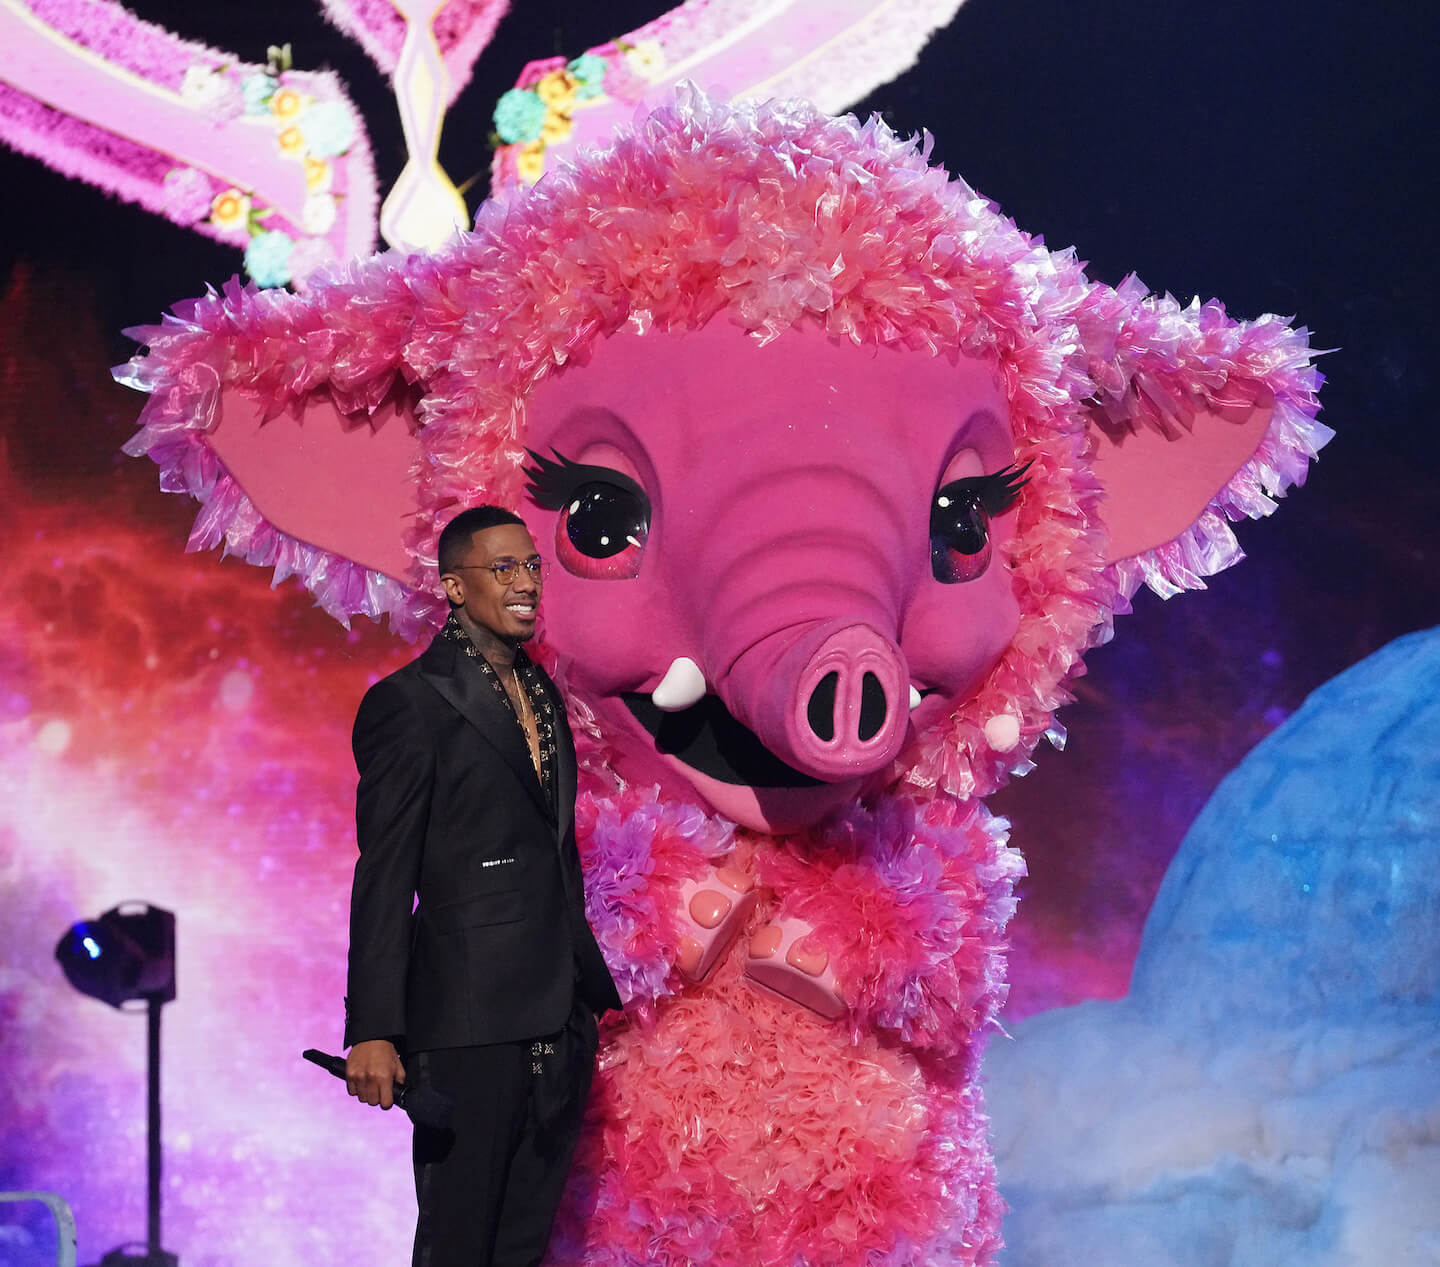 'The Masked Singer' host Nick Cannon next to the Baby Mammoth costume